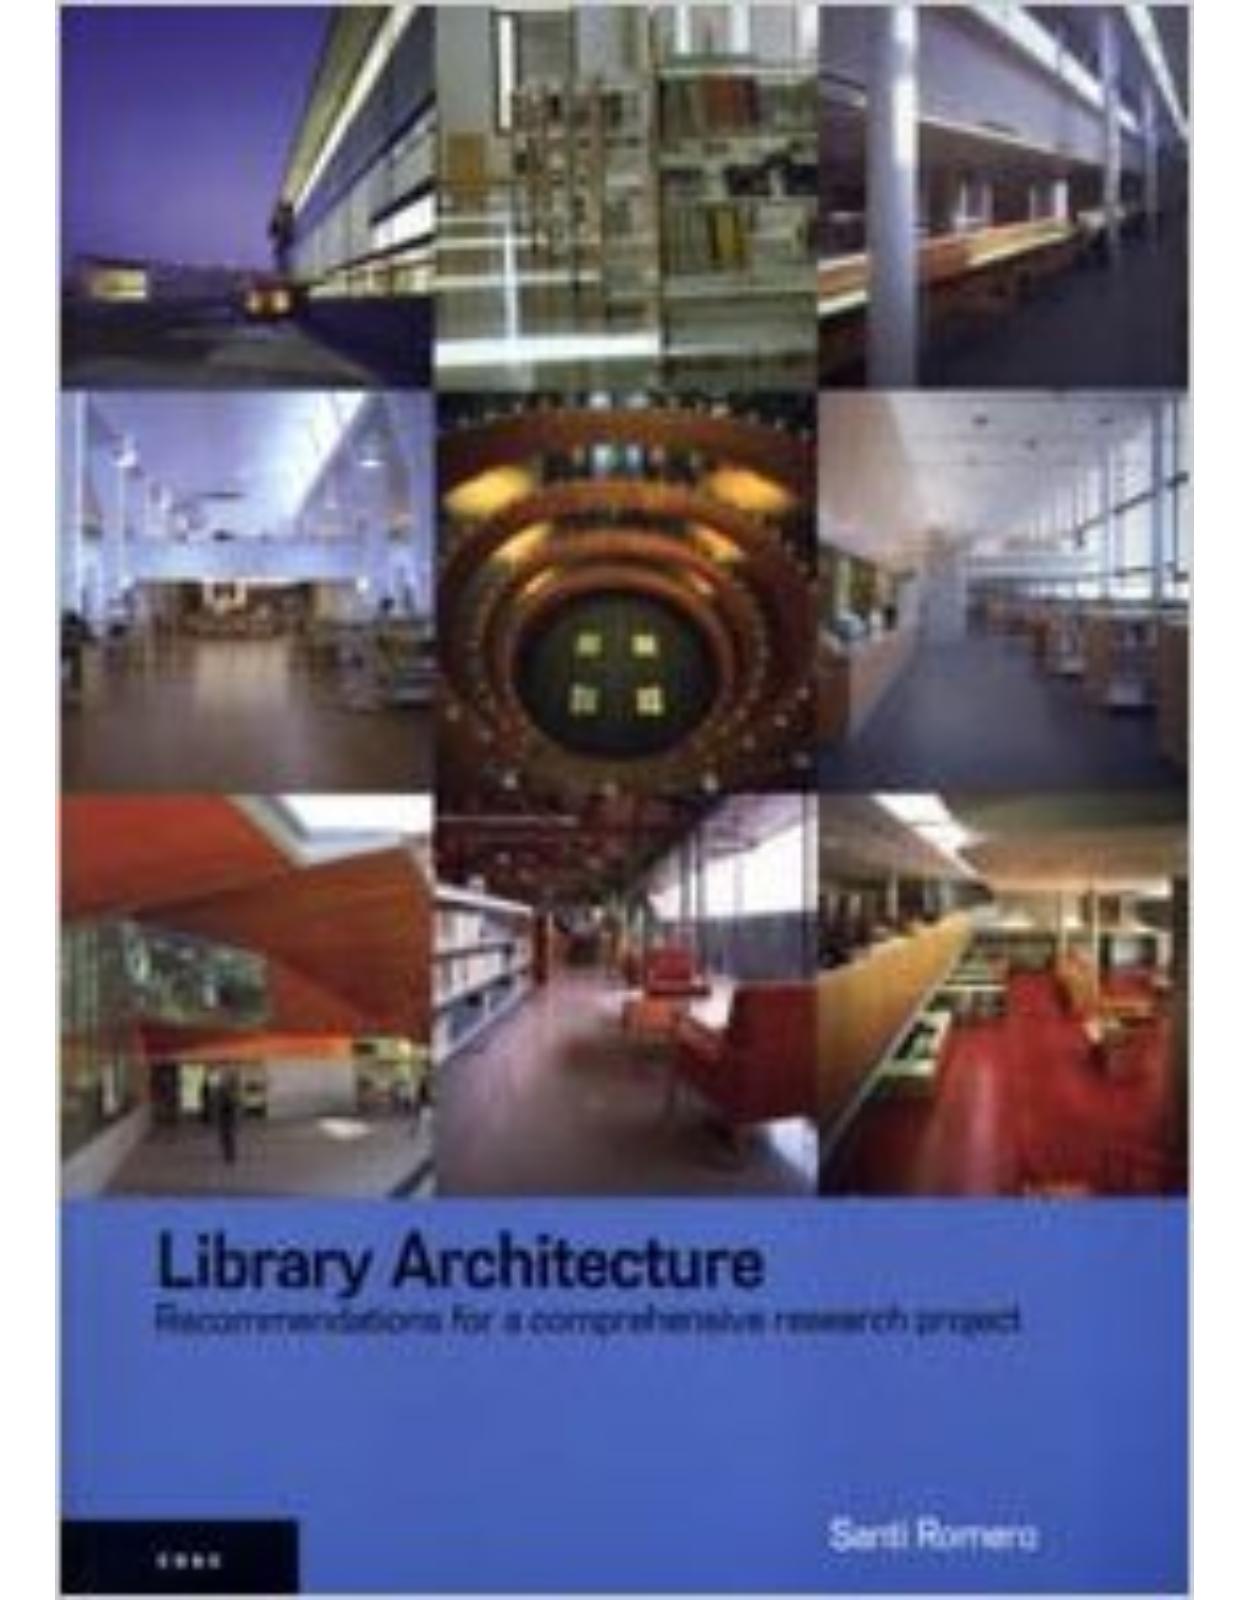 Library Architecture: Recommendations for a Comprehensive Research Project